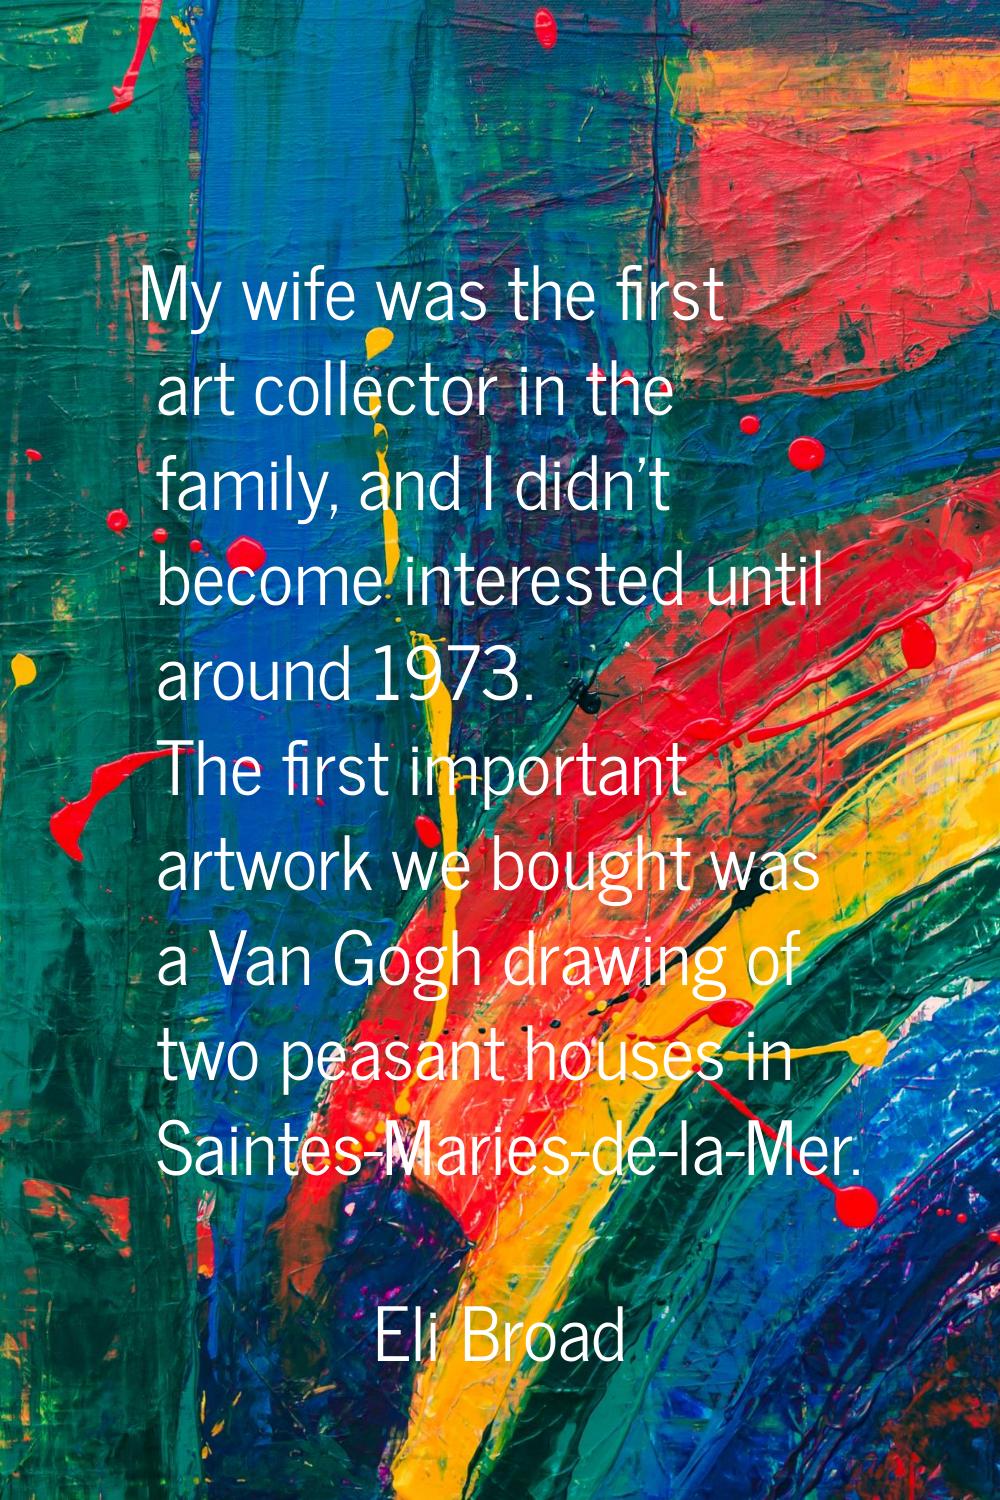 My wife was the first art collector in the family, and I didn't become interested until around 1973